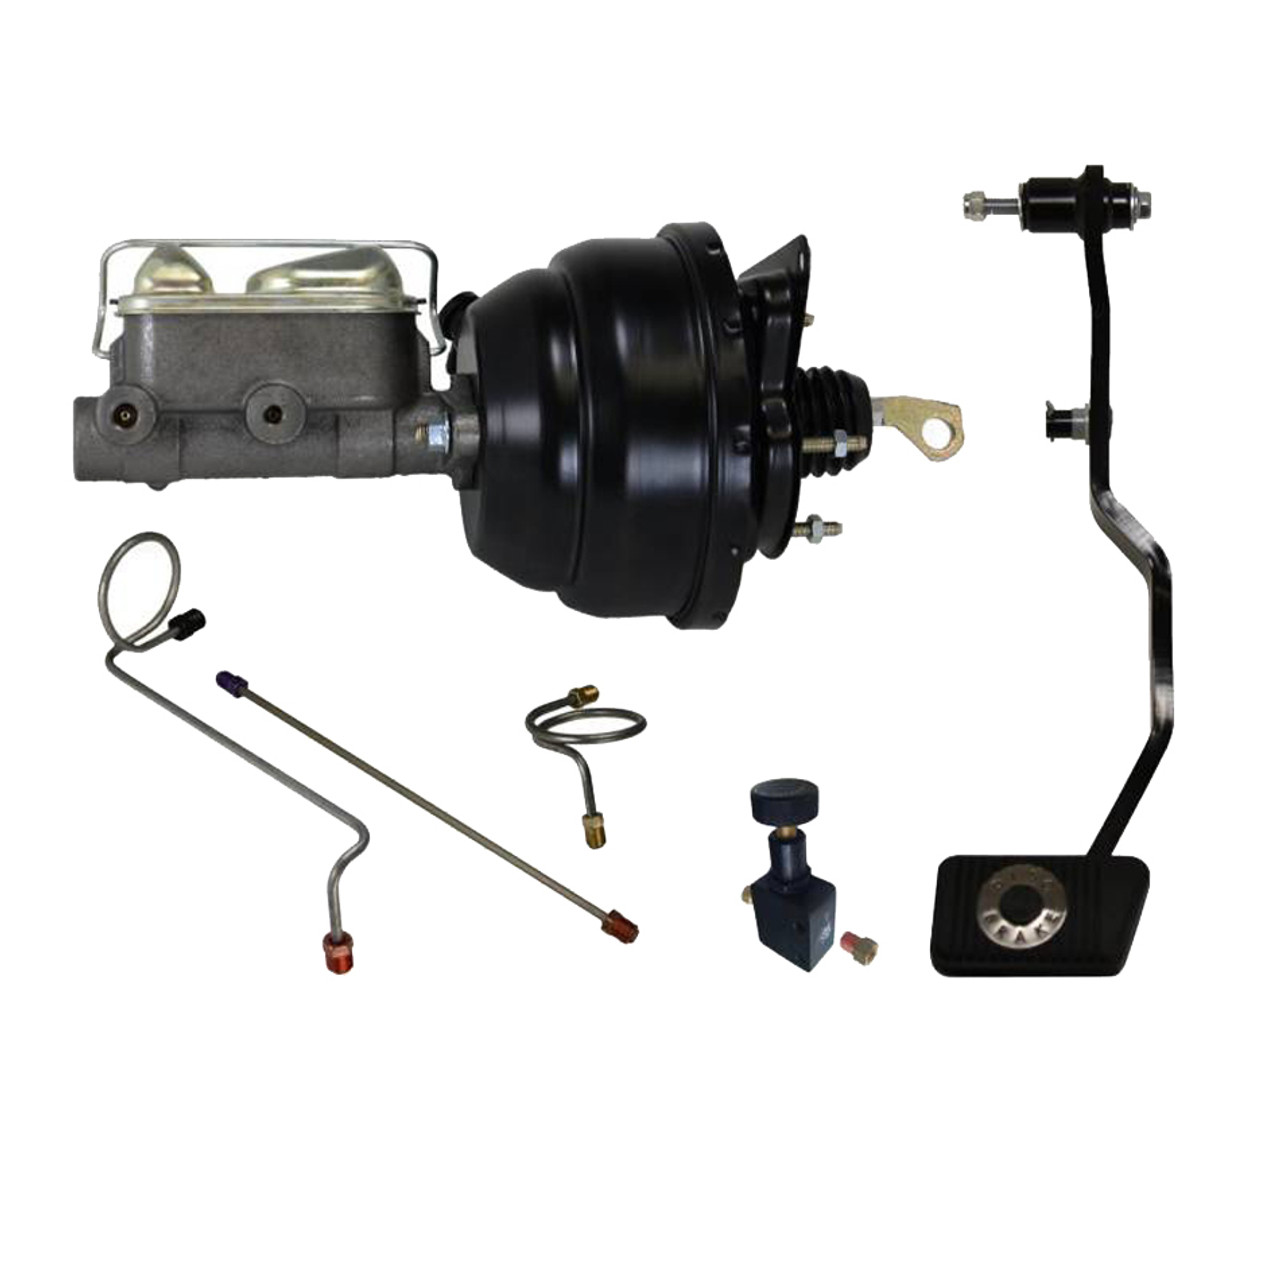 Hydraulic Kit - Power Br akes 67-70 Mustang